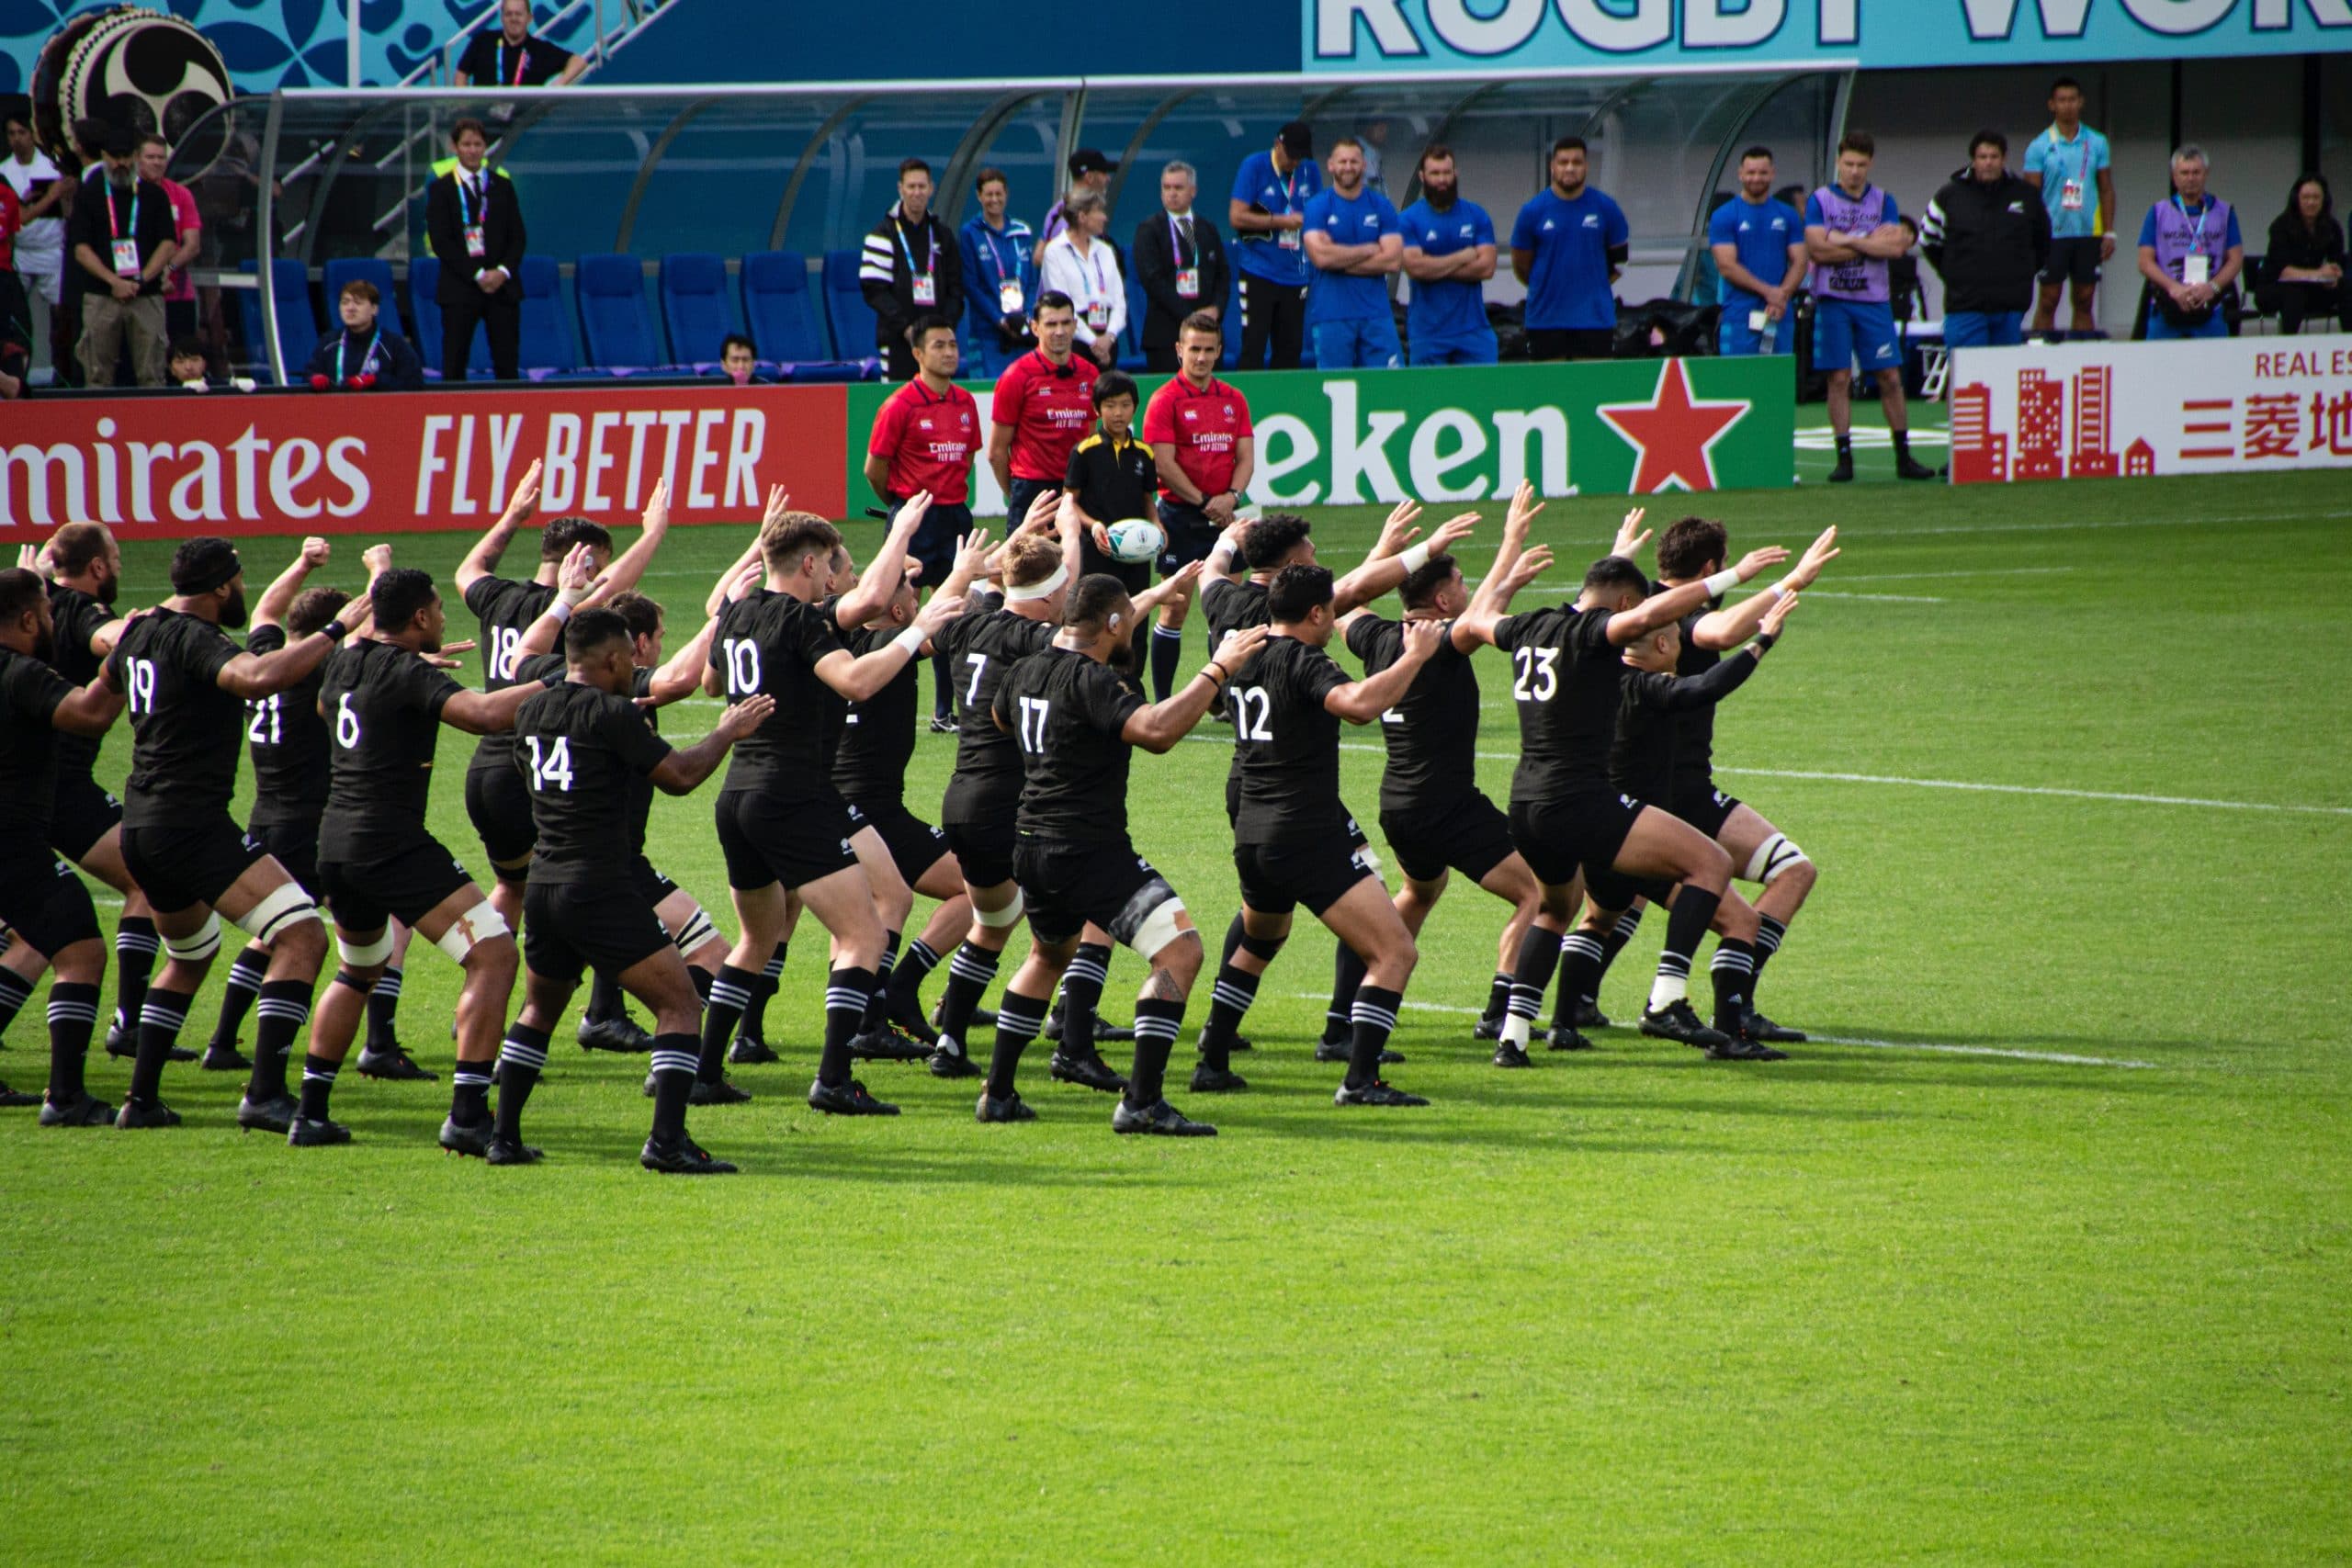 picture of the All Blacks performing the haka on the playing field